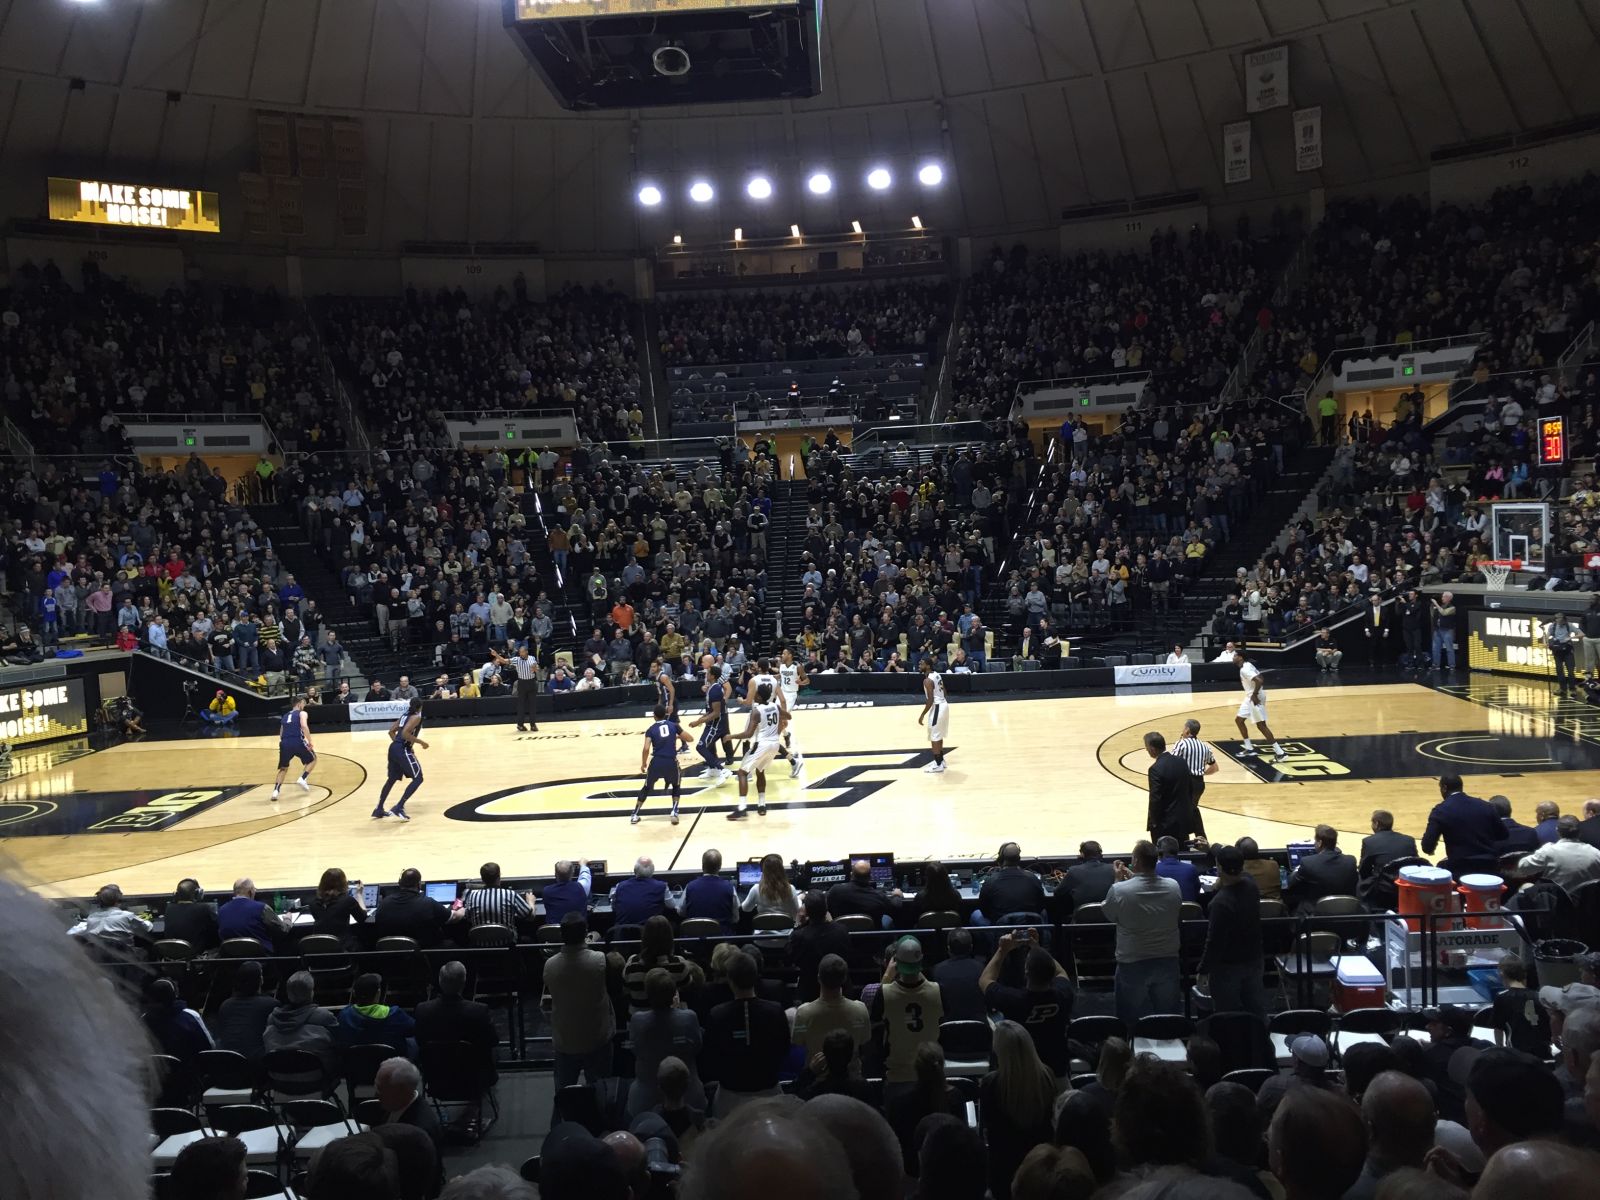 section 18, row 11 seat view  - mackey arena